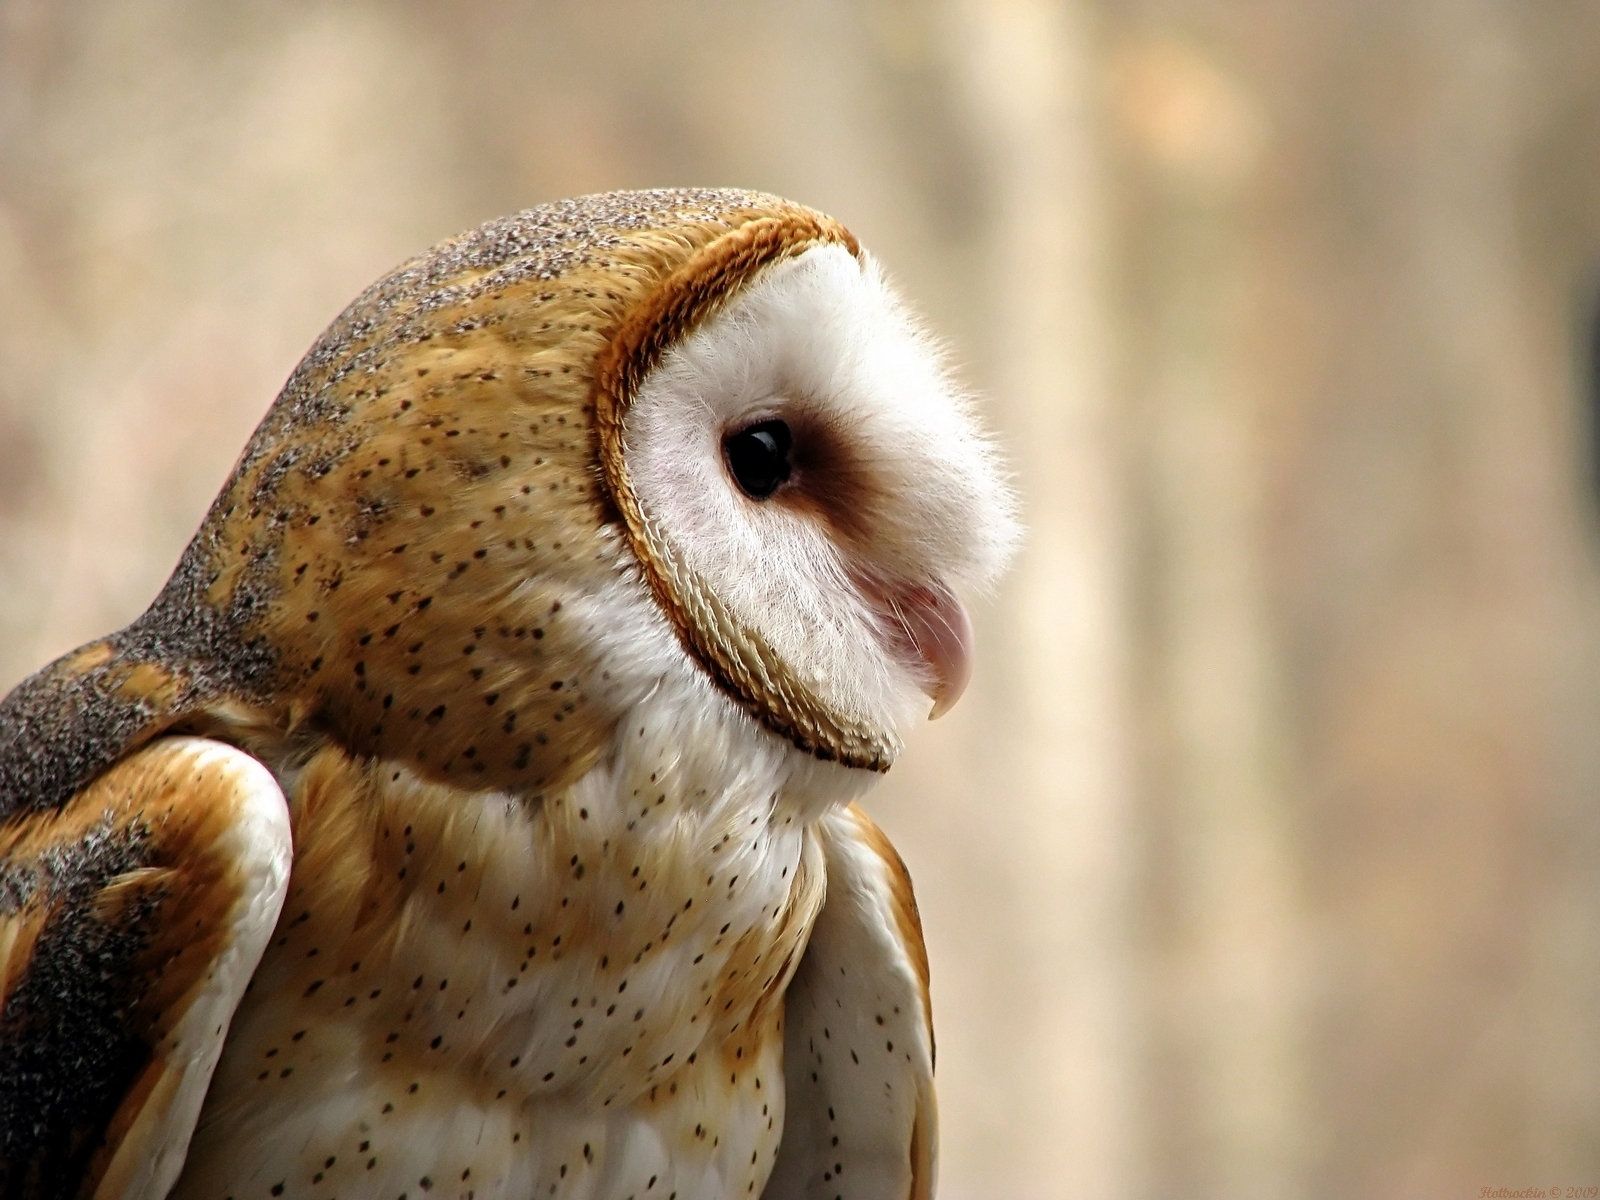 Free Download Cute Owl Image.